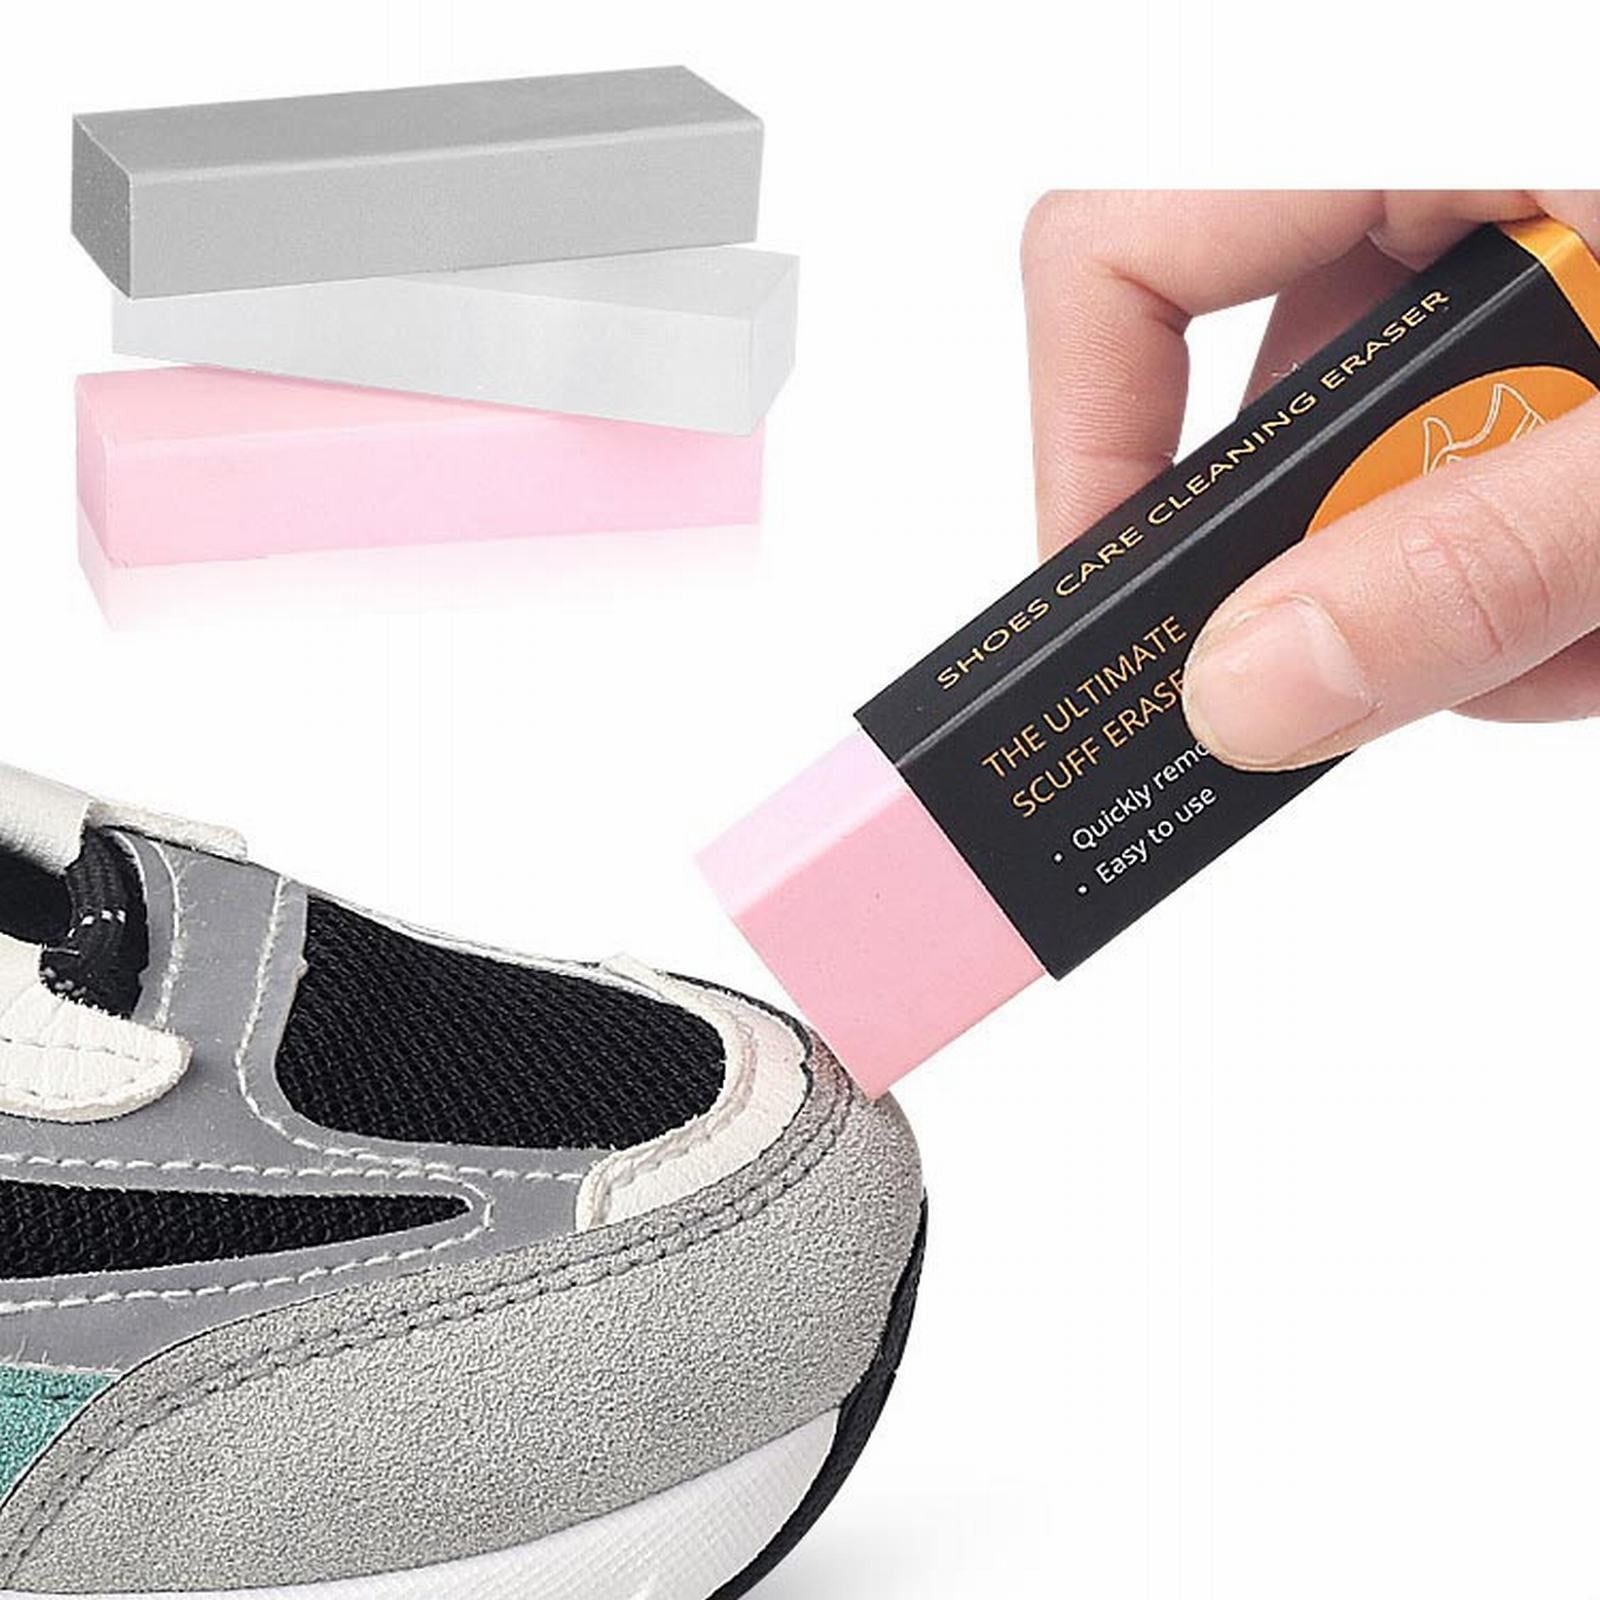 Magic Erasers Magical Shoe Cleaner Eraser Cleaning And Whitening Clean Dirt  Effectively Without Water Shoe Cleaner Eraser FN50